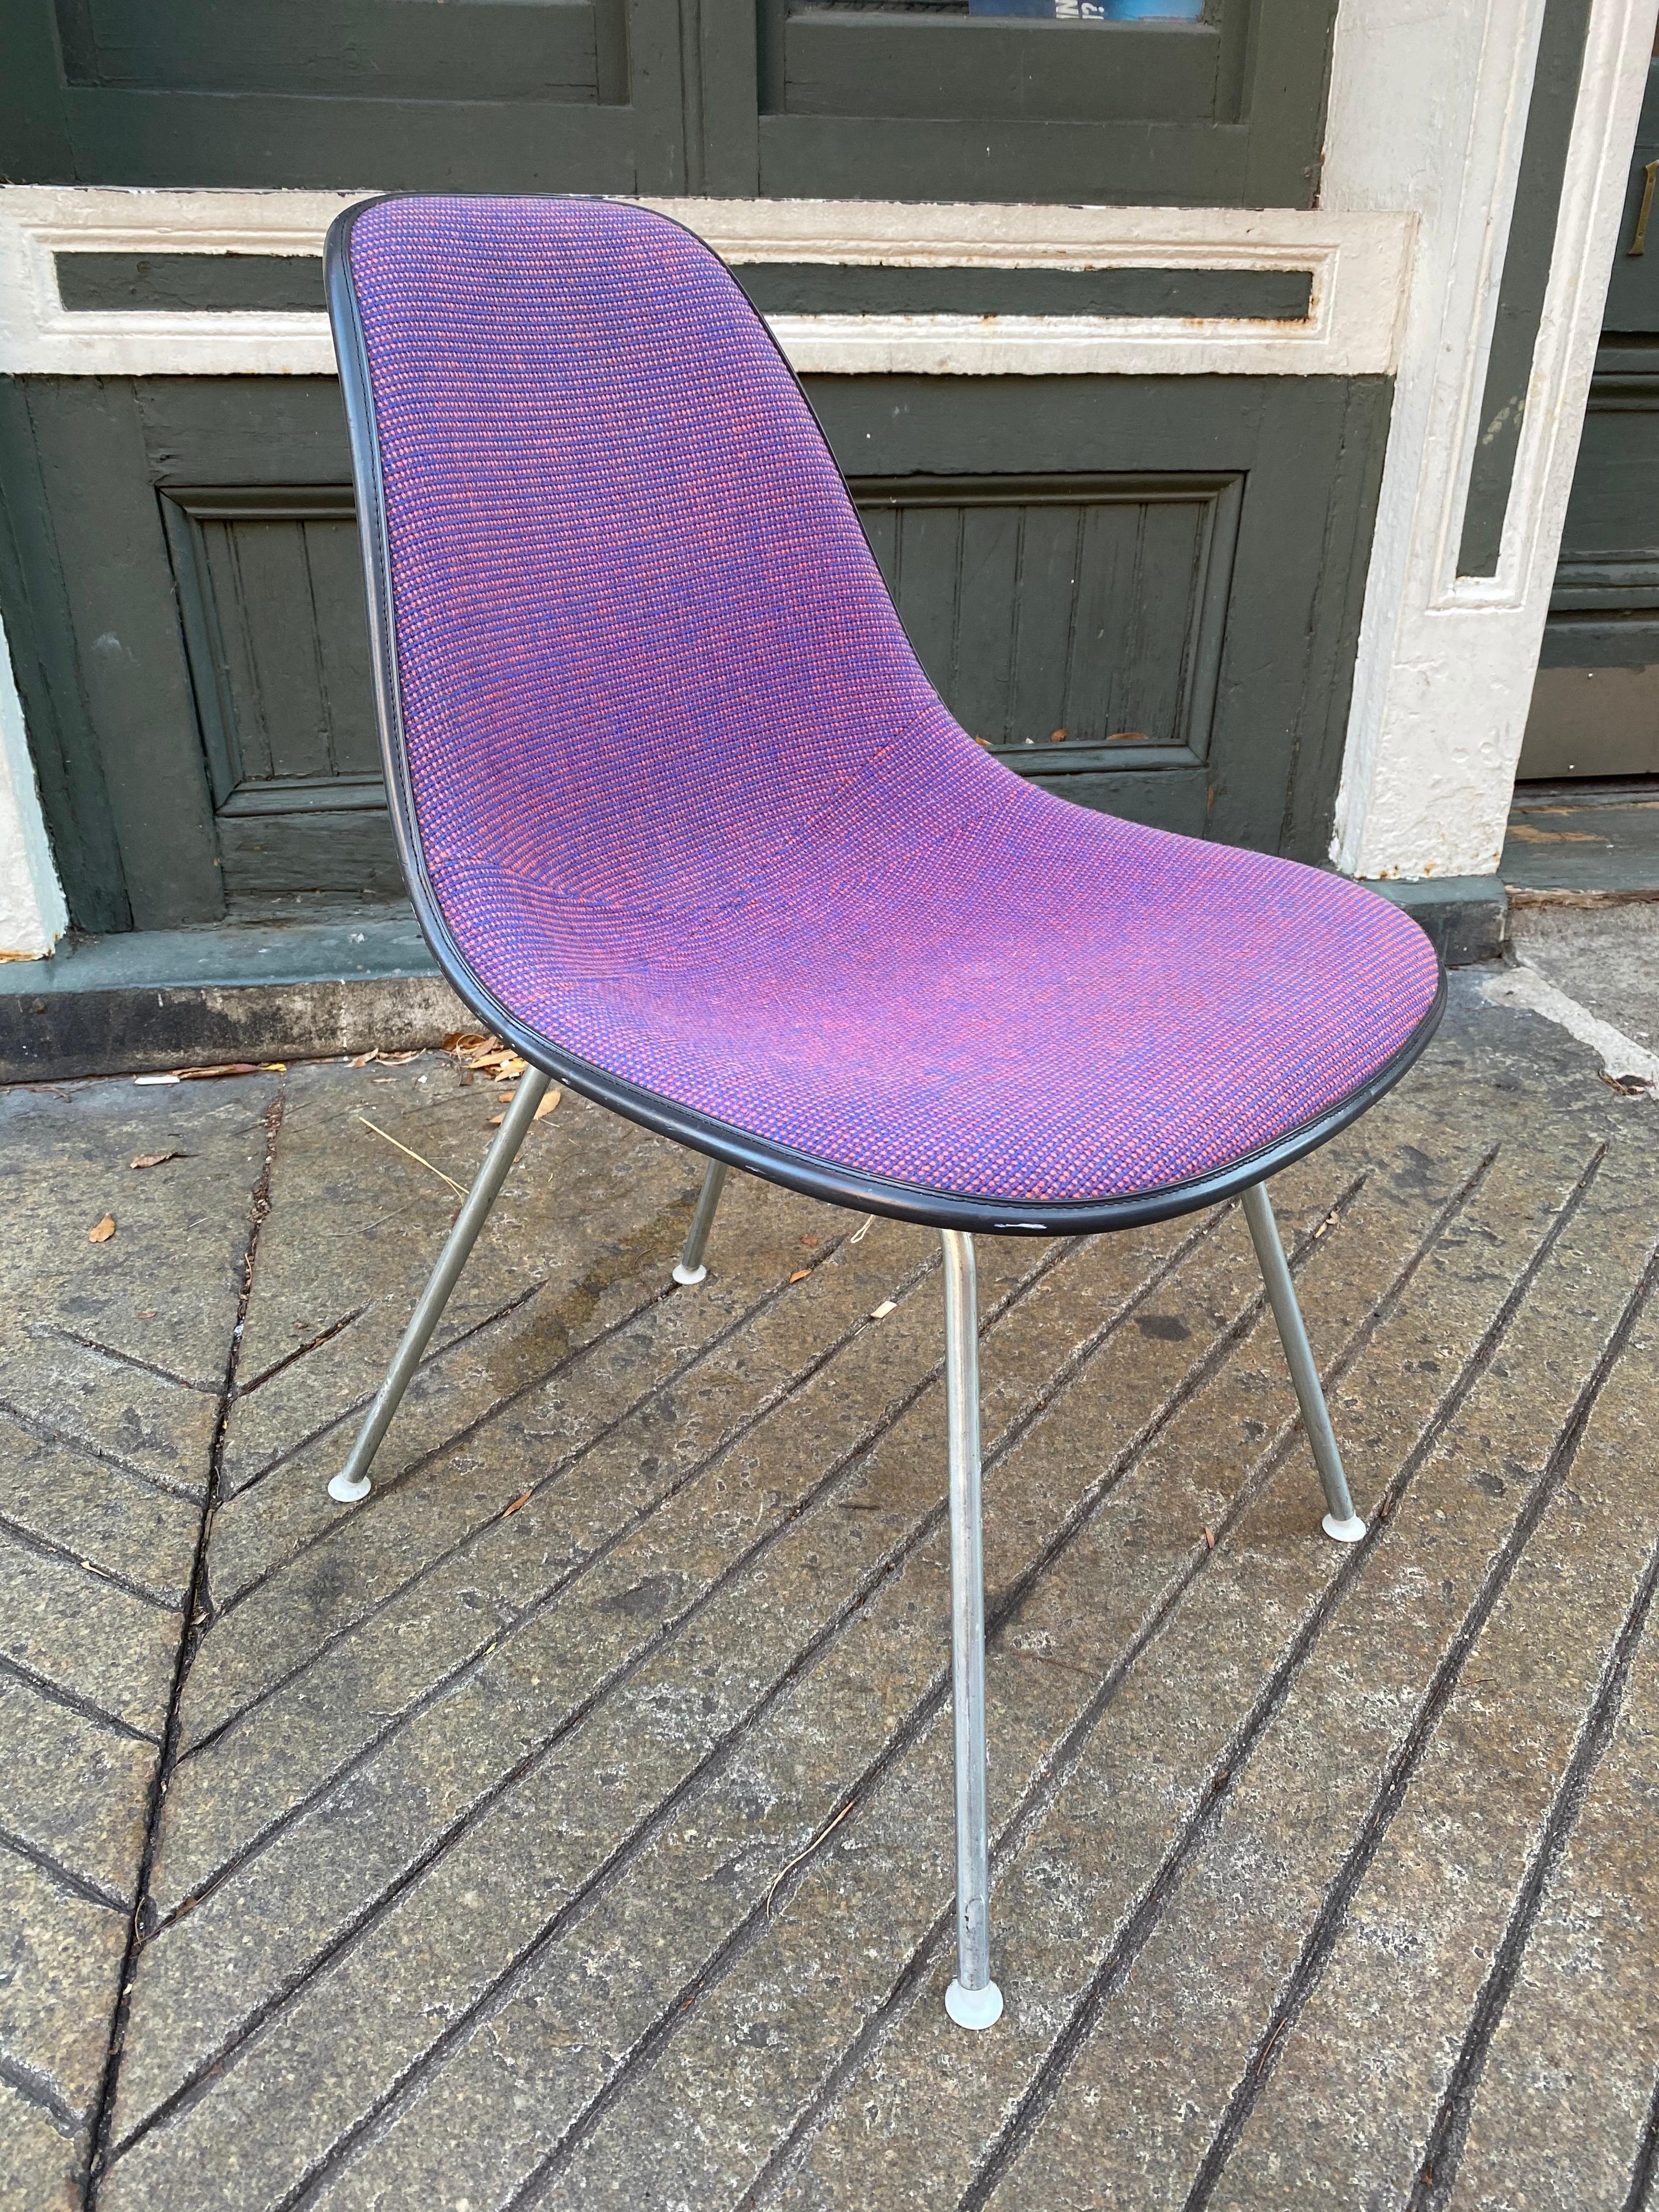 Eames side shell for Herman miller with it's original purple or red Alexander Girard fabric. Fabric and foam in great shape!